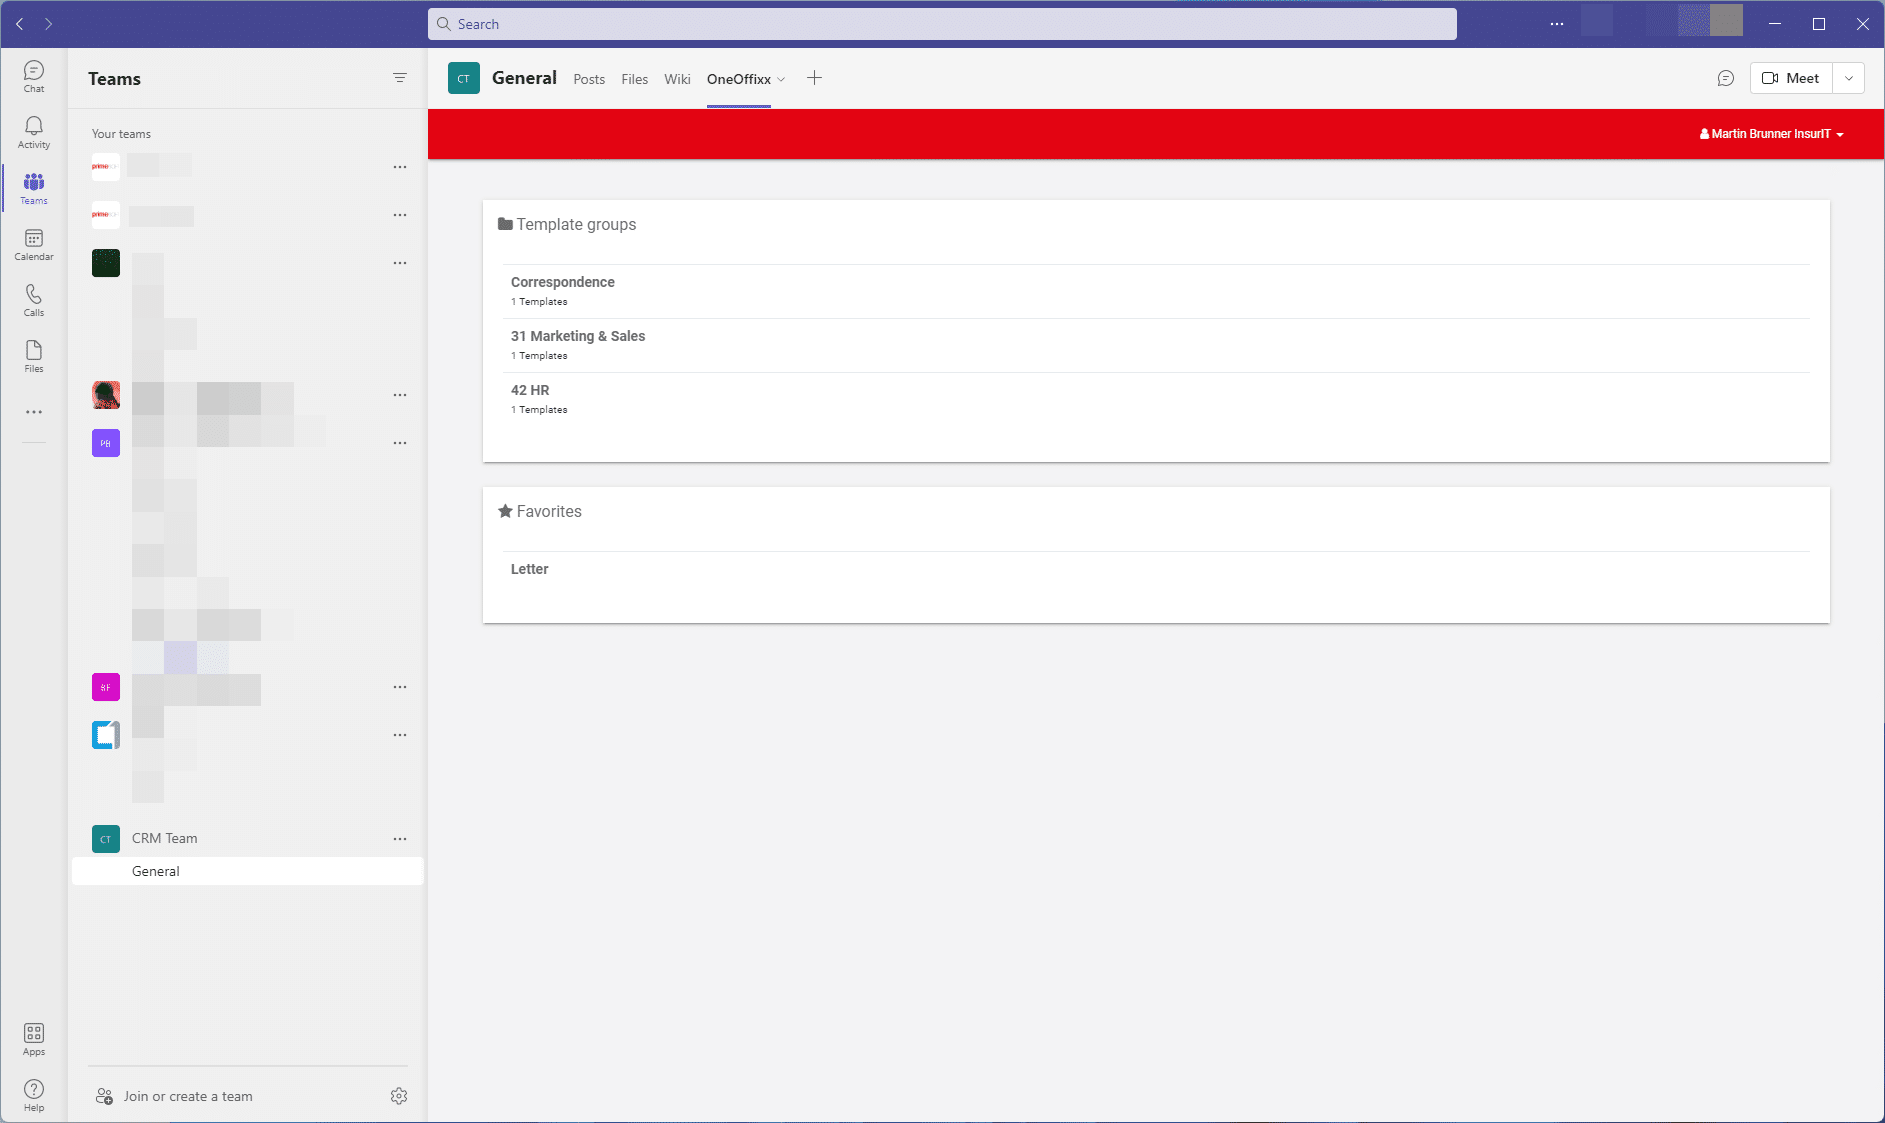 OneOffixx is now used in Microsoft Teams